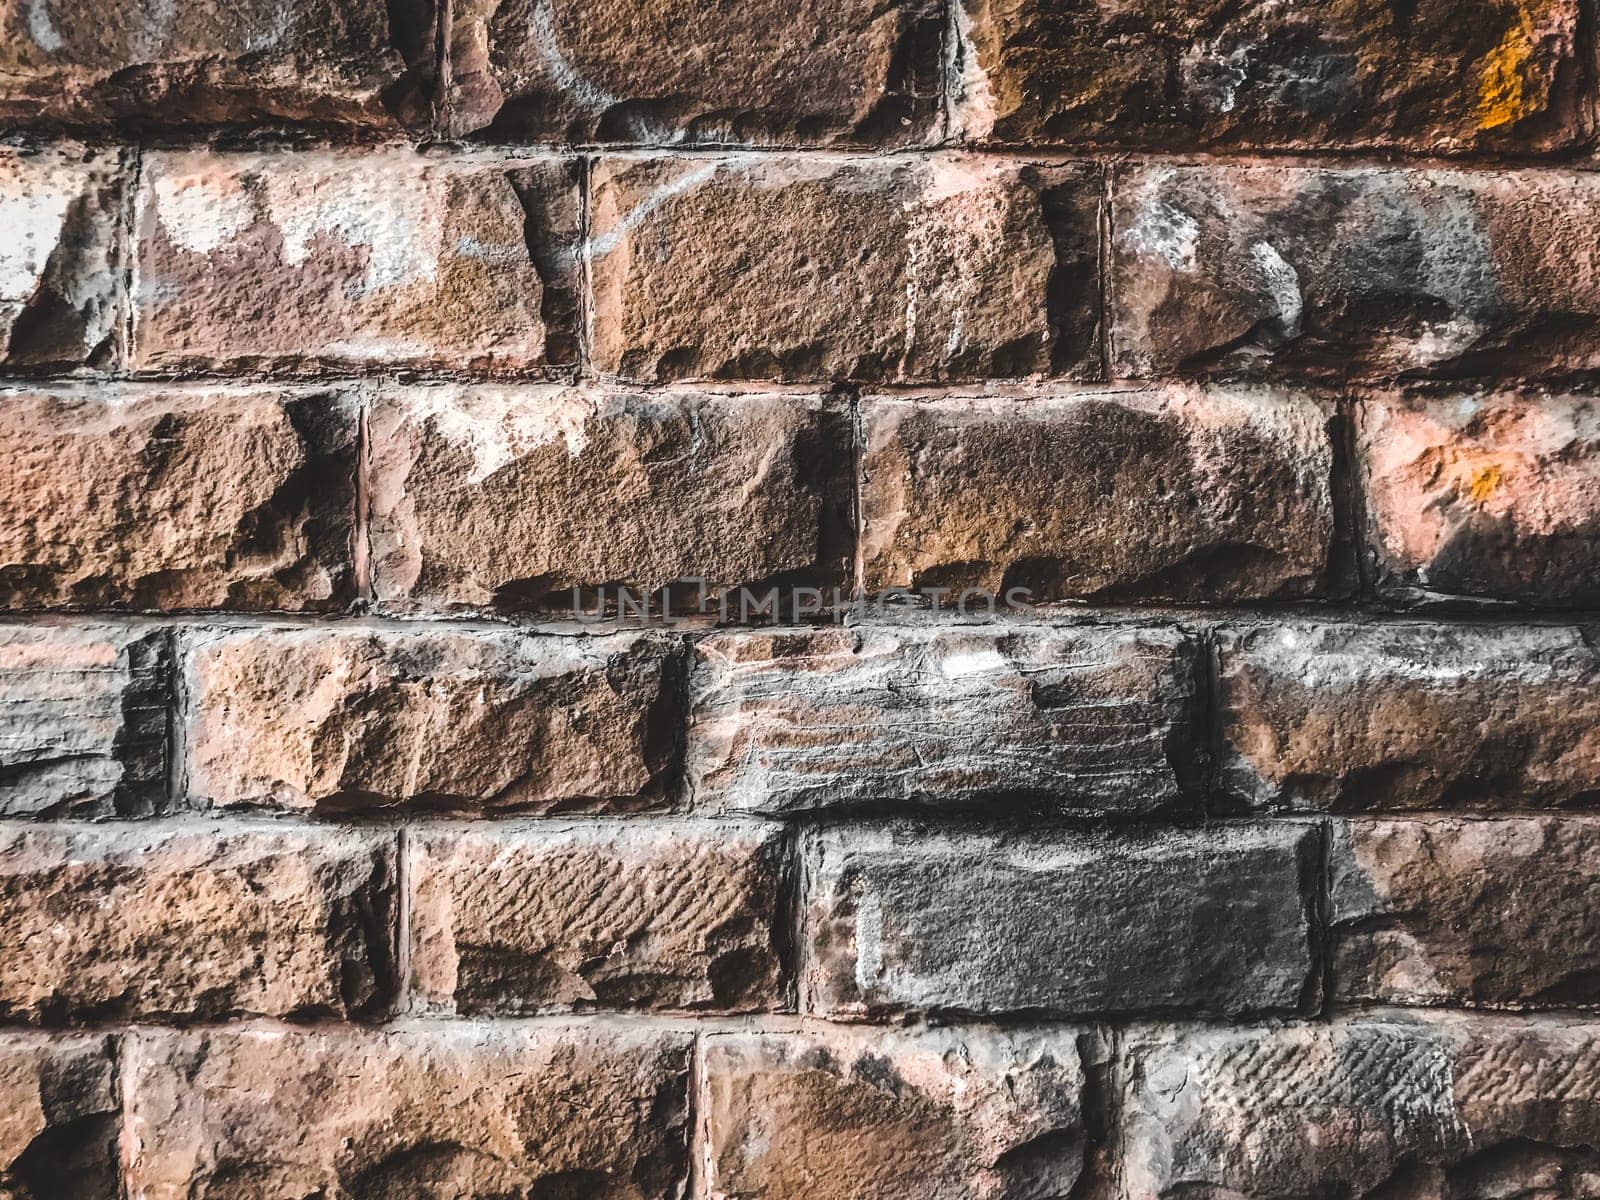 A brick wall with a few white marks on it. The wall is brown and has a rough texture